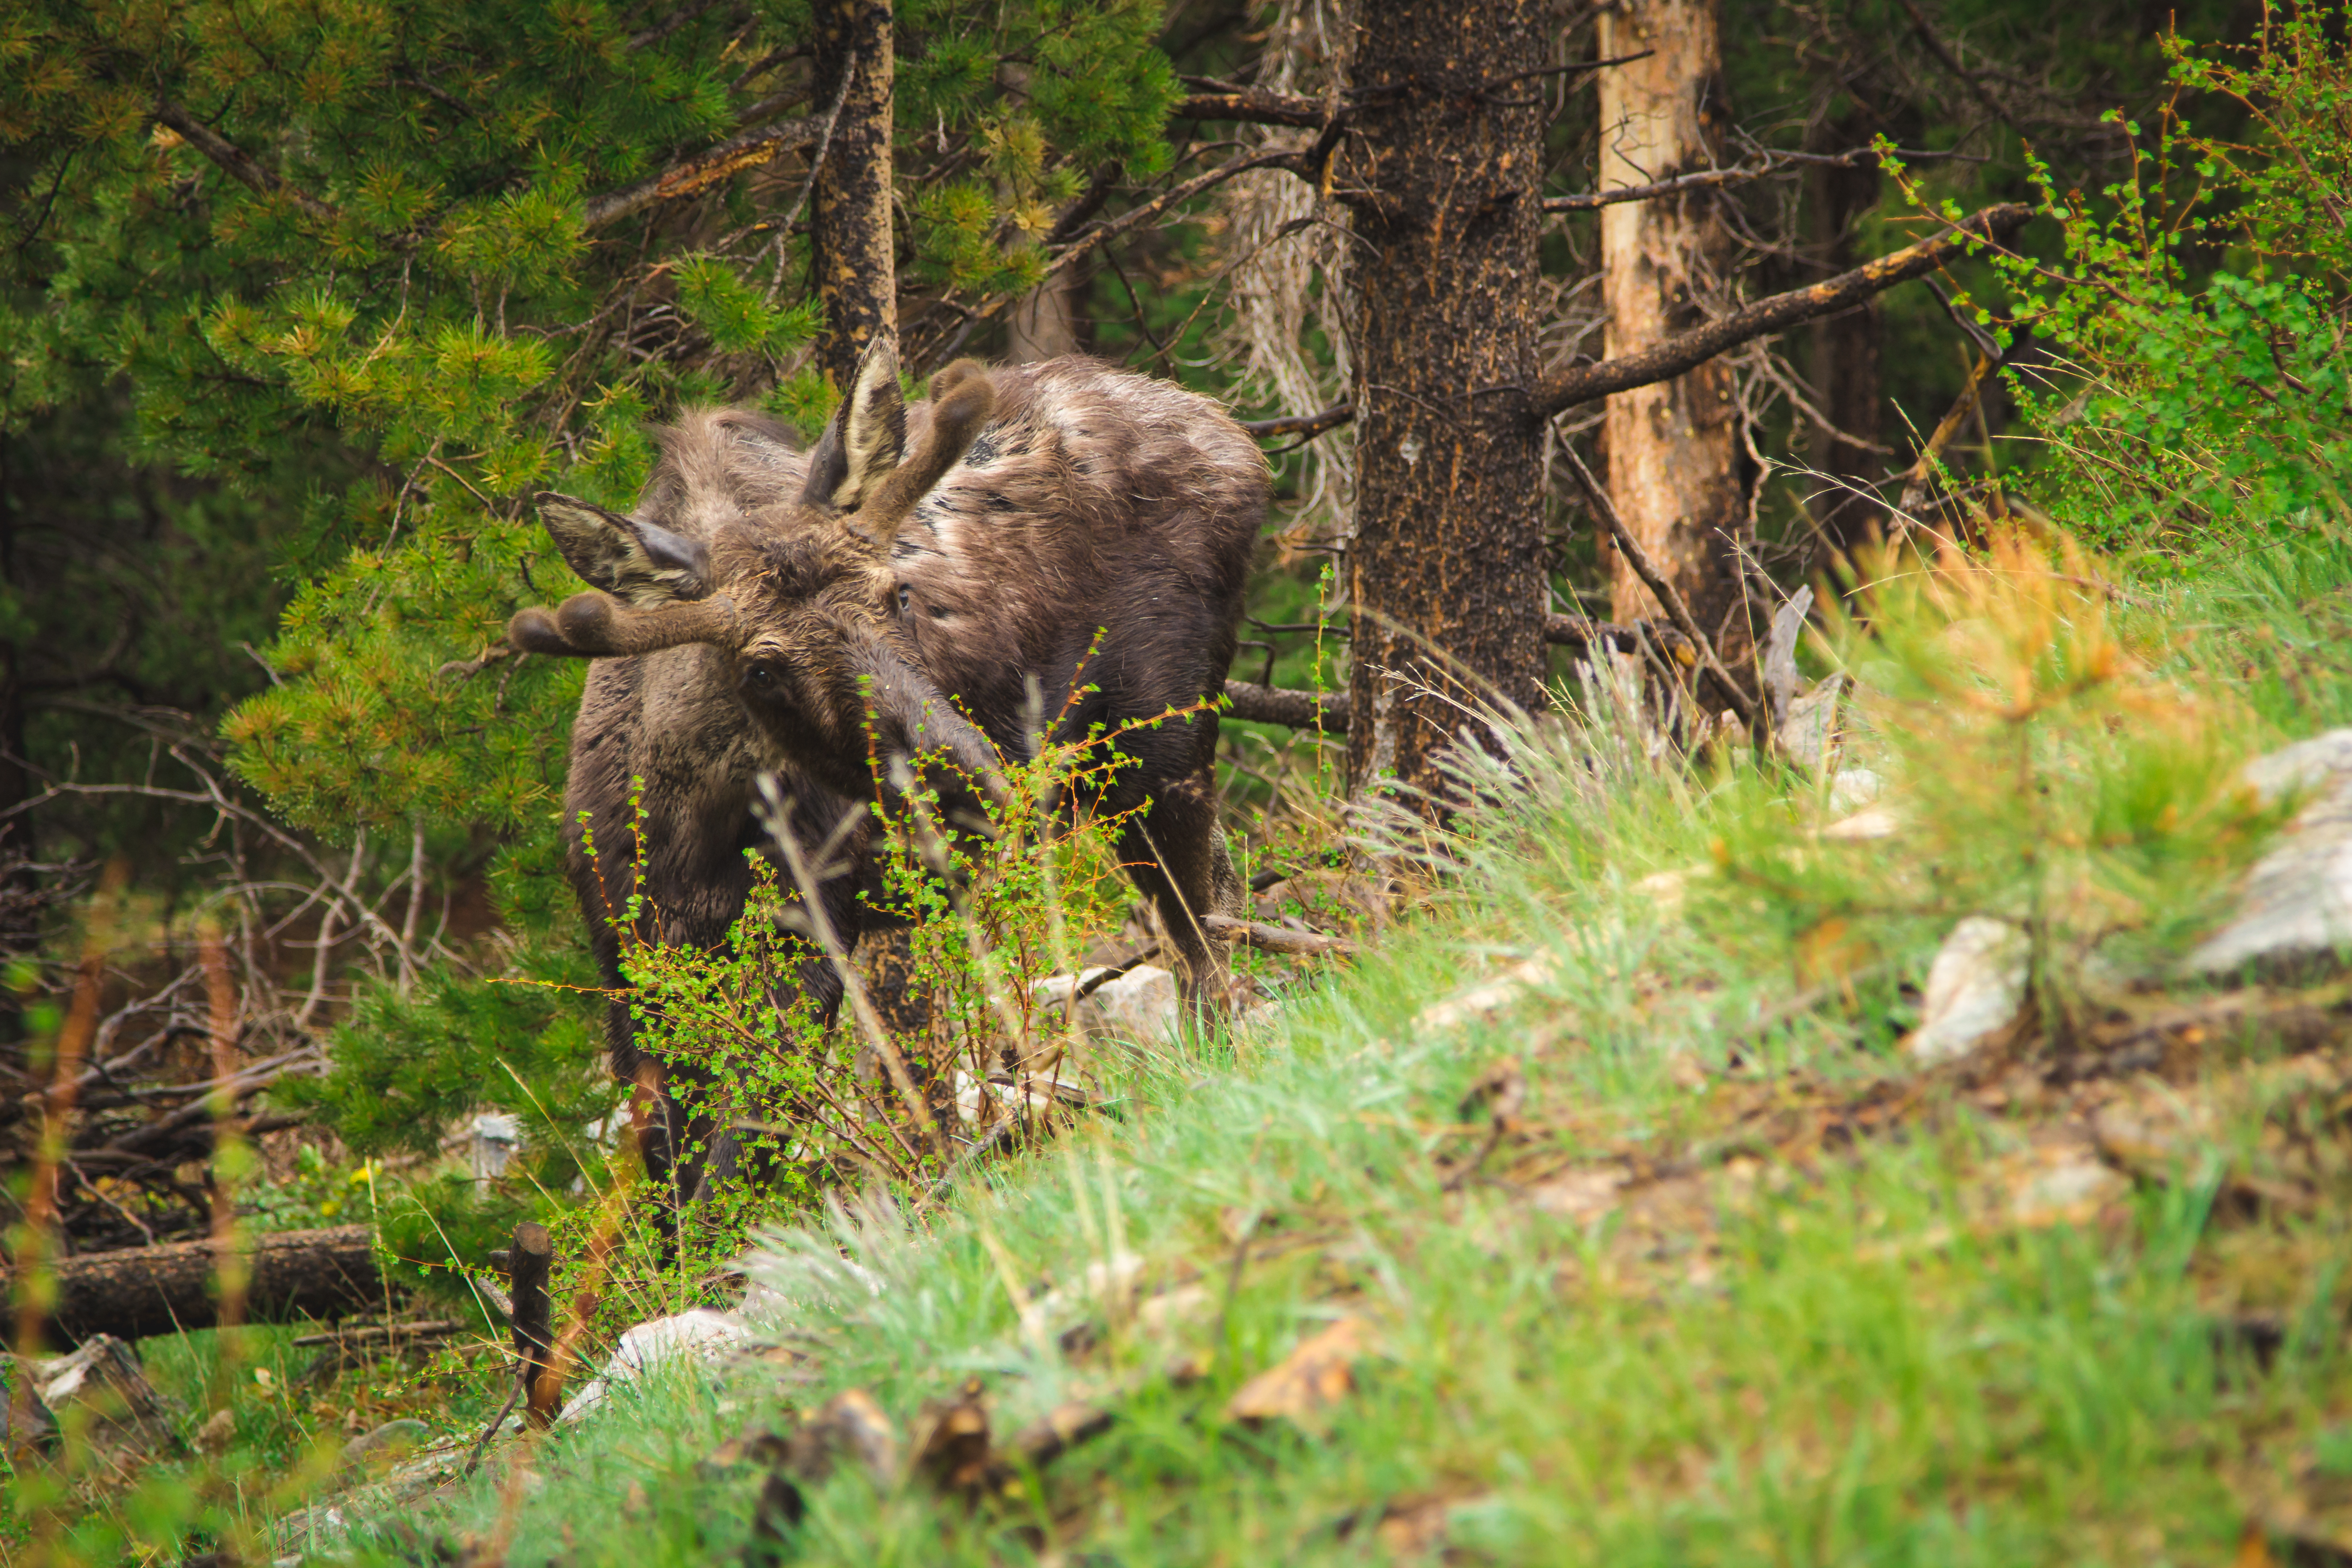 Reindeer grazing in a forest photo